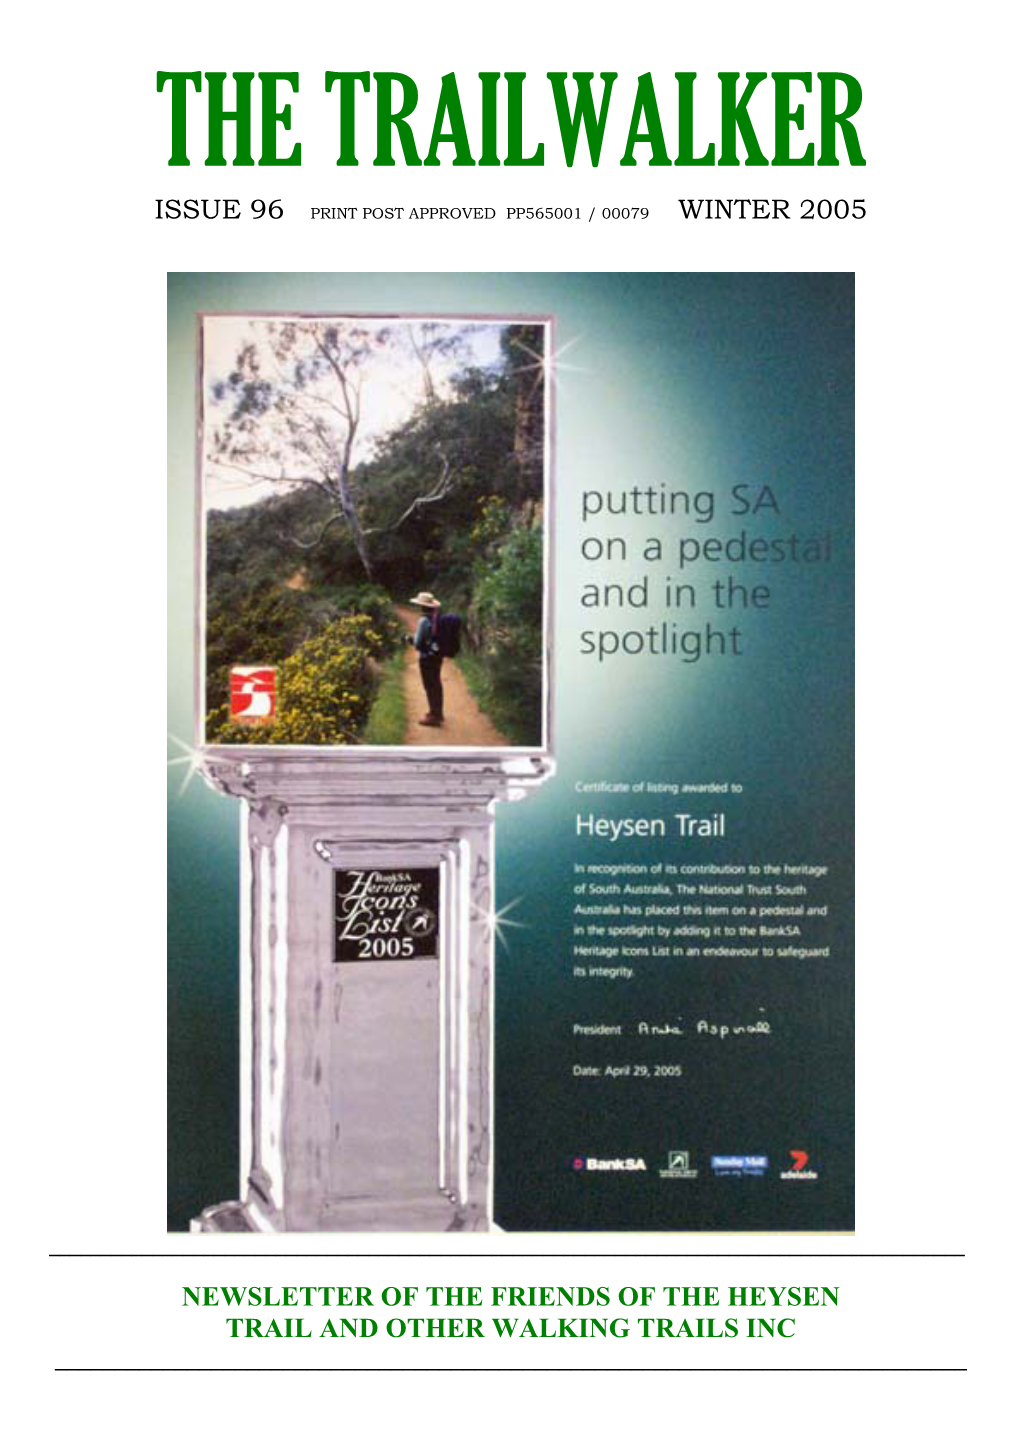 Winter 2005 Newsletter of the Friends of the Heysen Trail